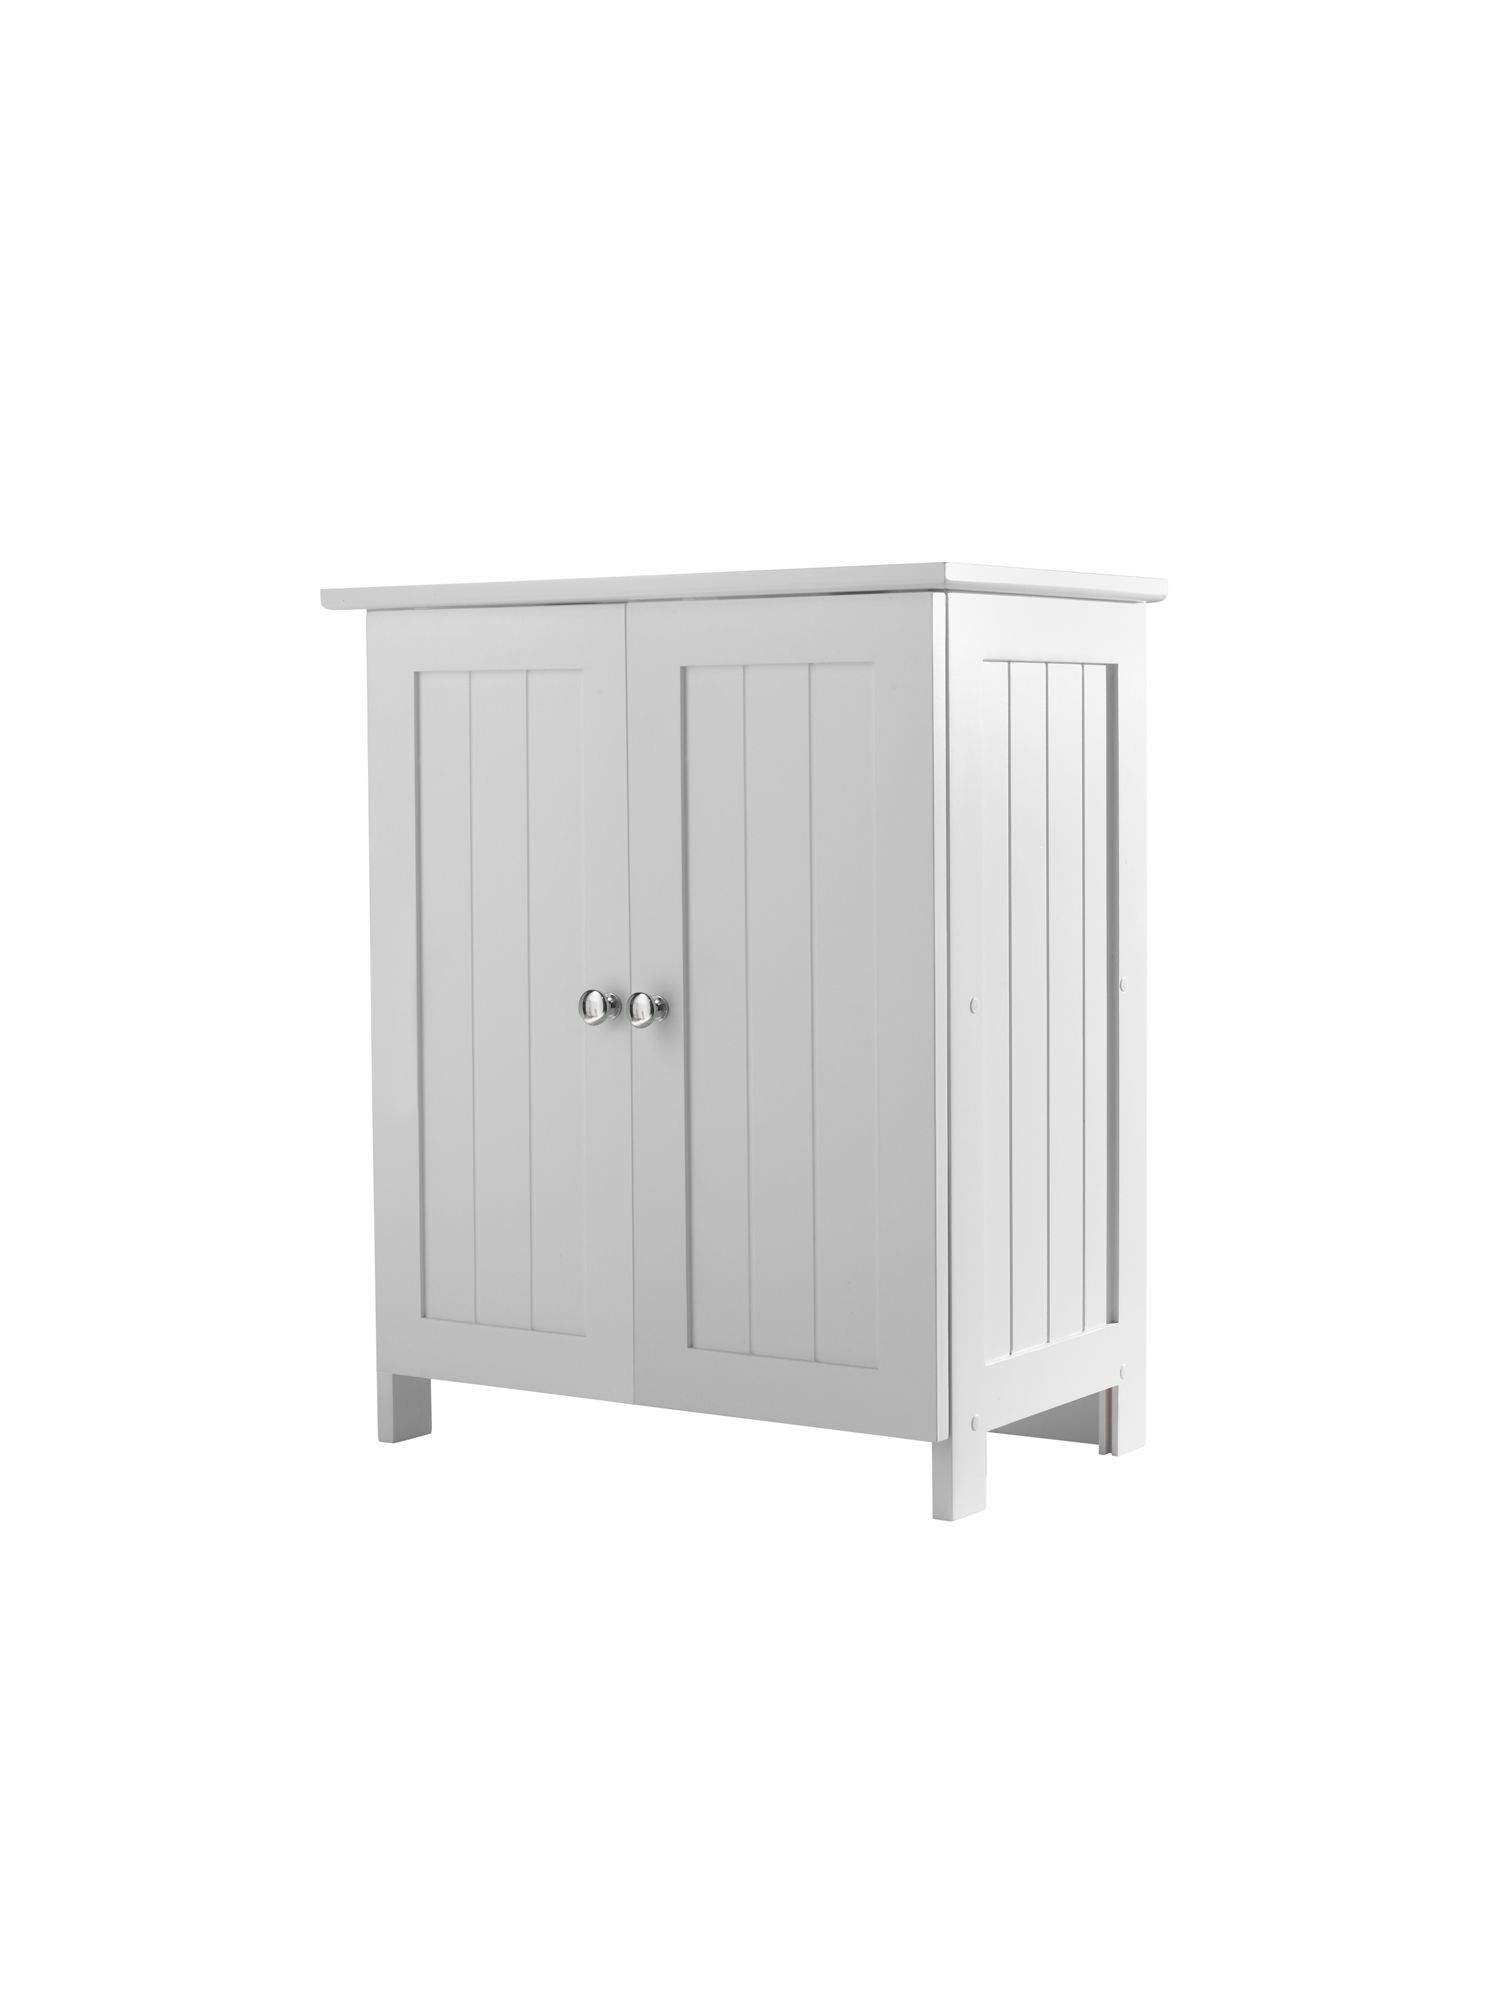 B&Q Adelite Tongue & Groove Lacquered White Under sink cabinet | DIY at B&Q